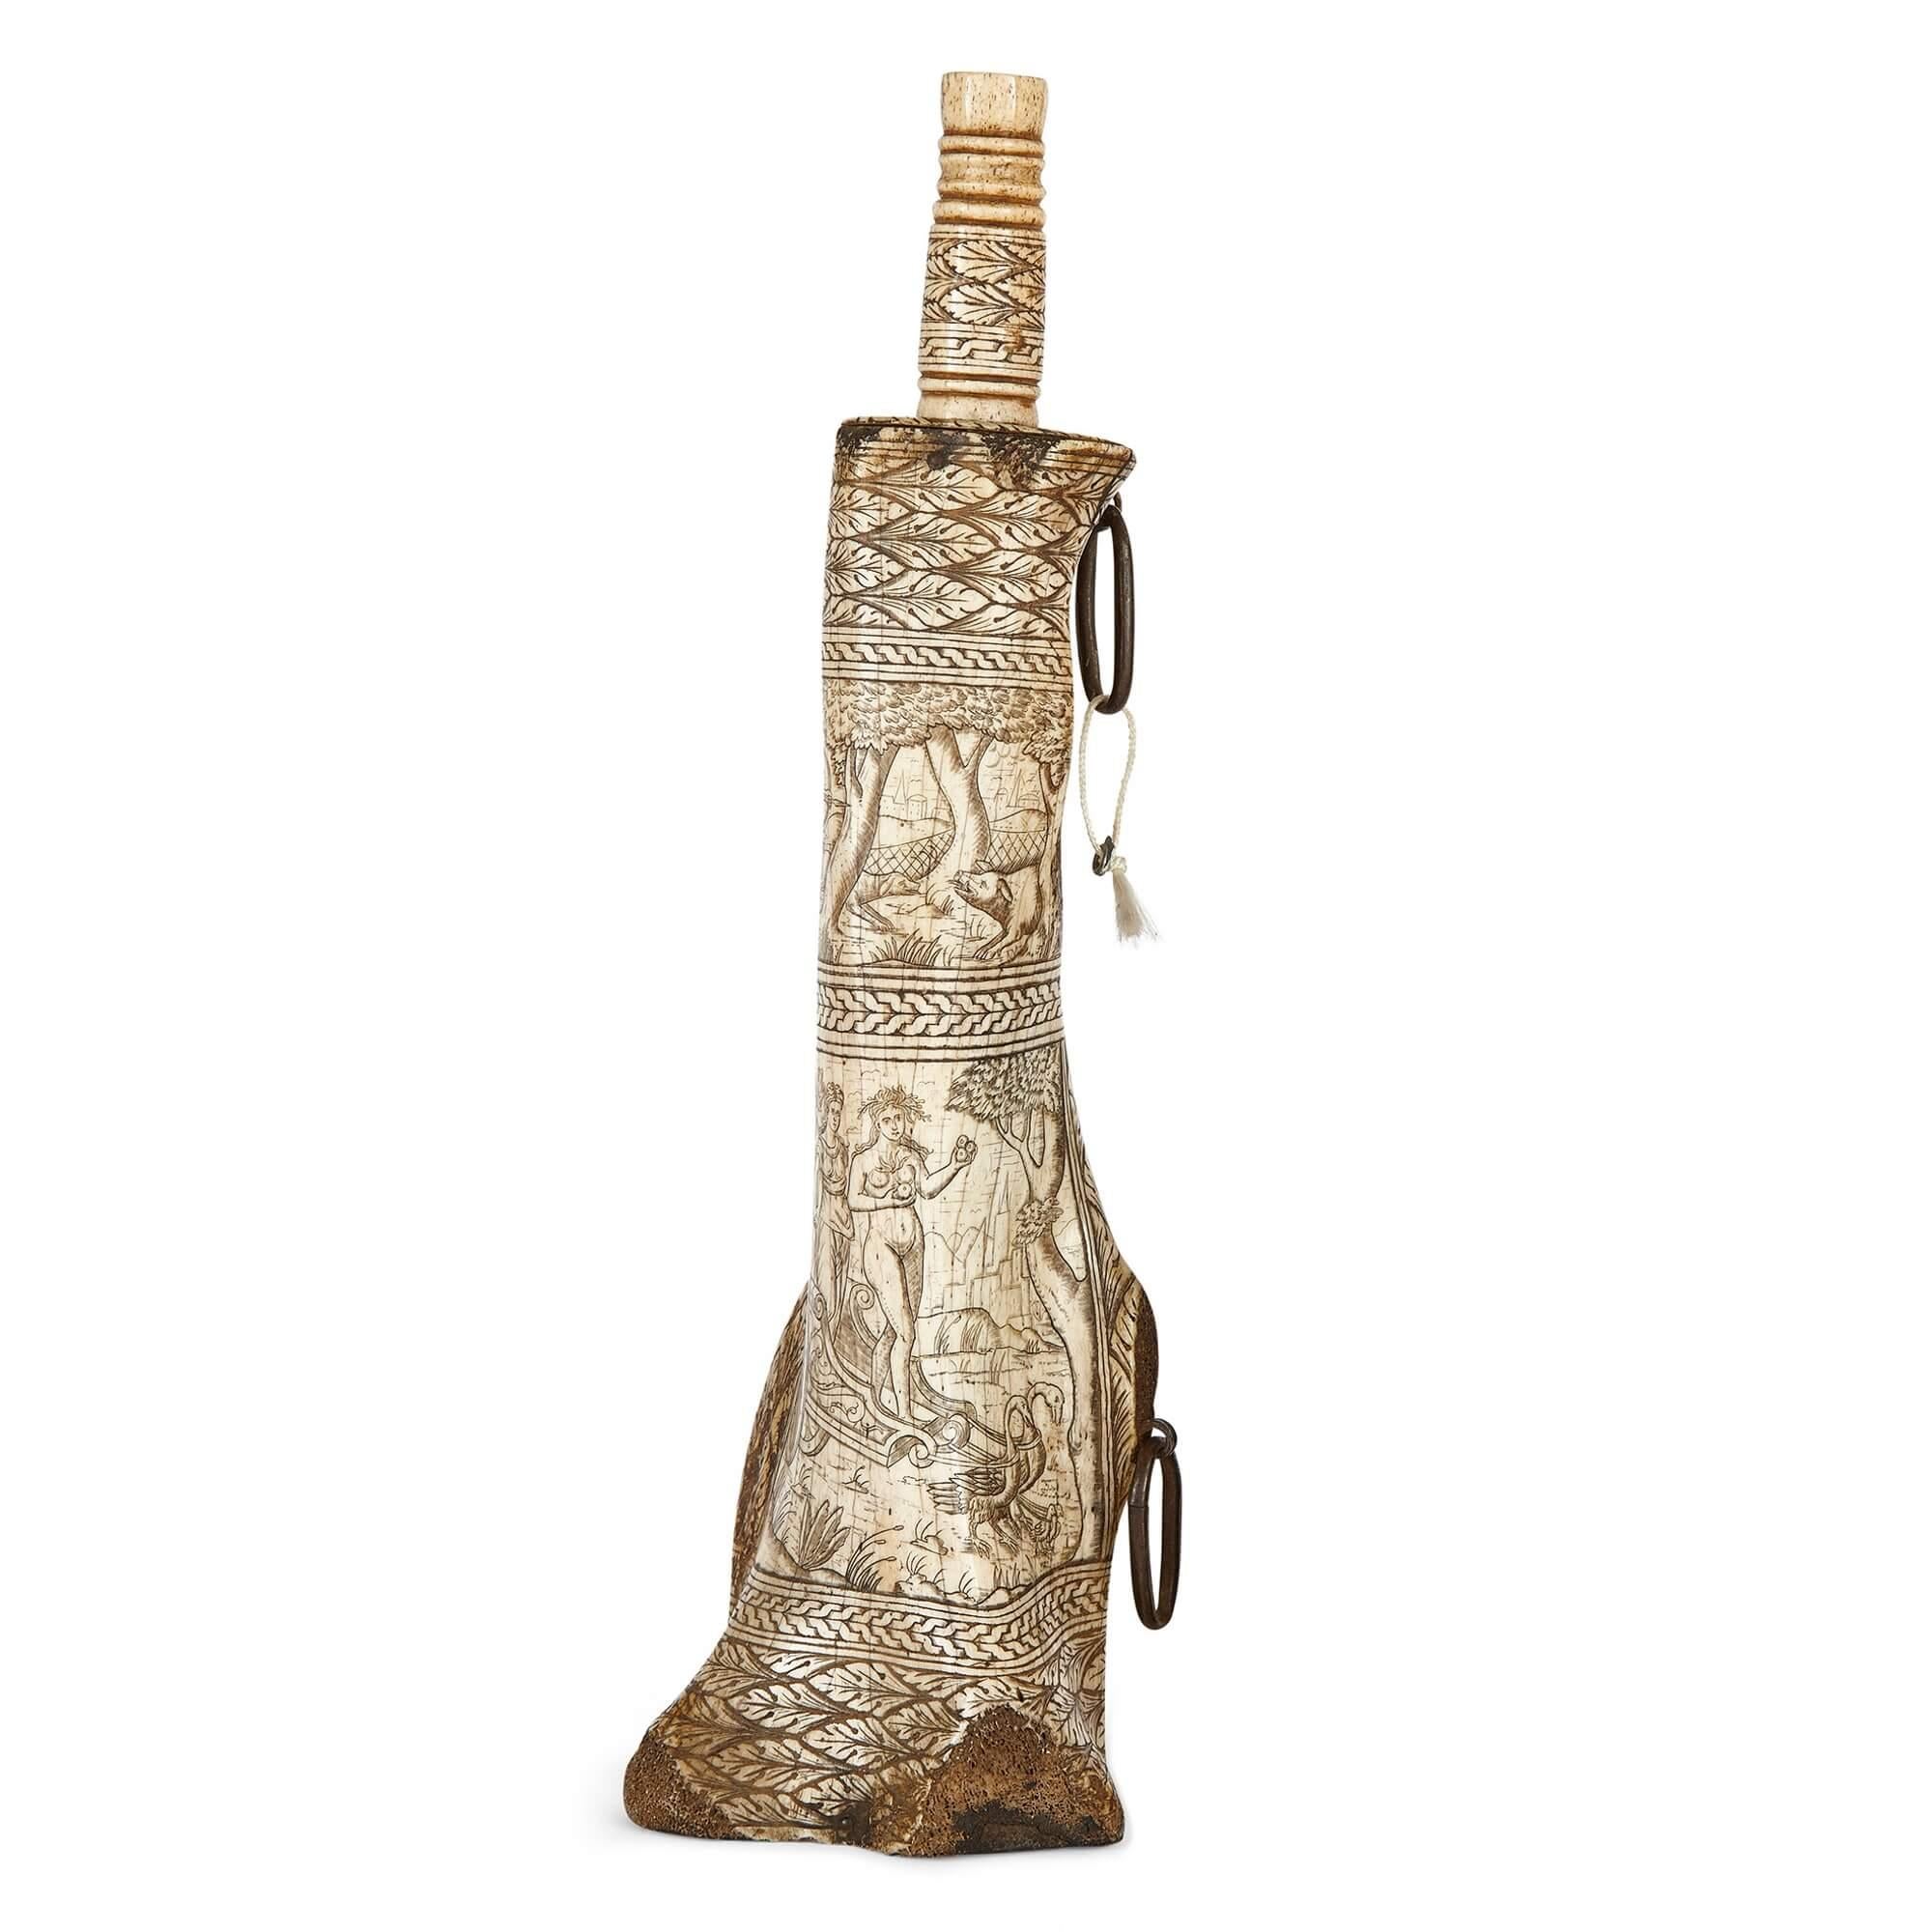 Exceptionally detailed 19th century carved bone gunpowder flask
Italian, 19th Century
Height 36cm, diameter 11cm

This unconventional gunpowder flask, created in Italy in the 19th century, has been meticulously sculpted from a single mammalian femur